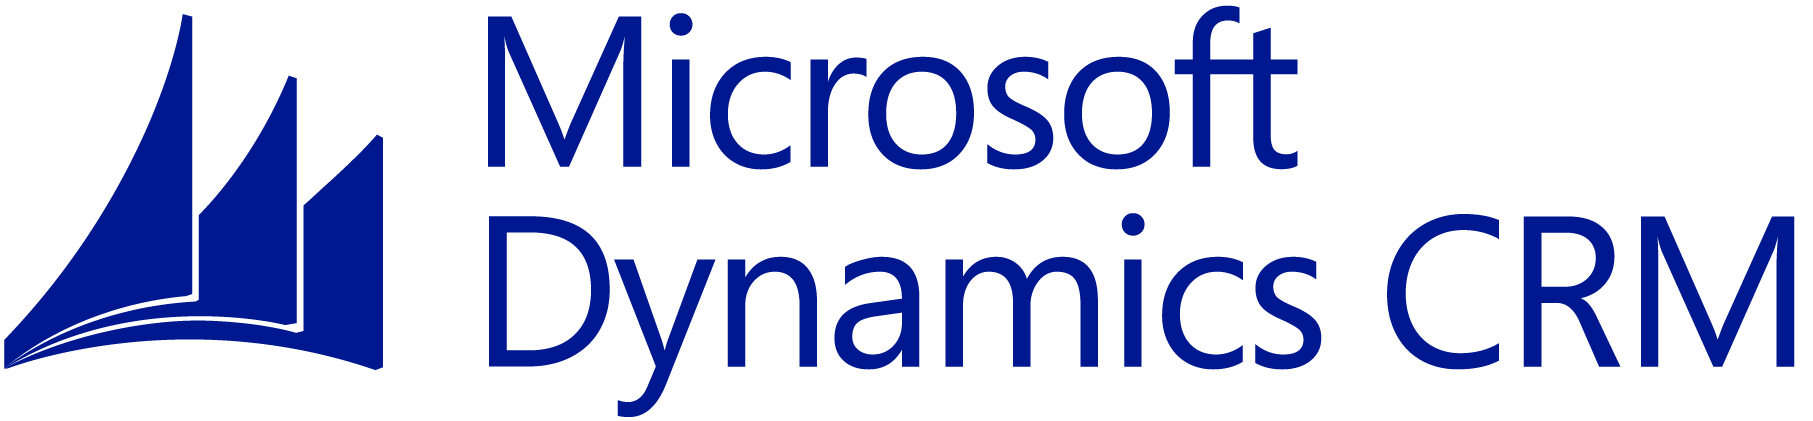 Microsoft Dynamics CRM 2013 Logo - Want to see Dynamics CRM 2013? Register for the Customer experience